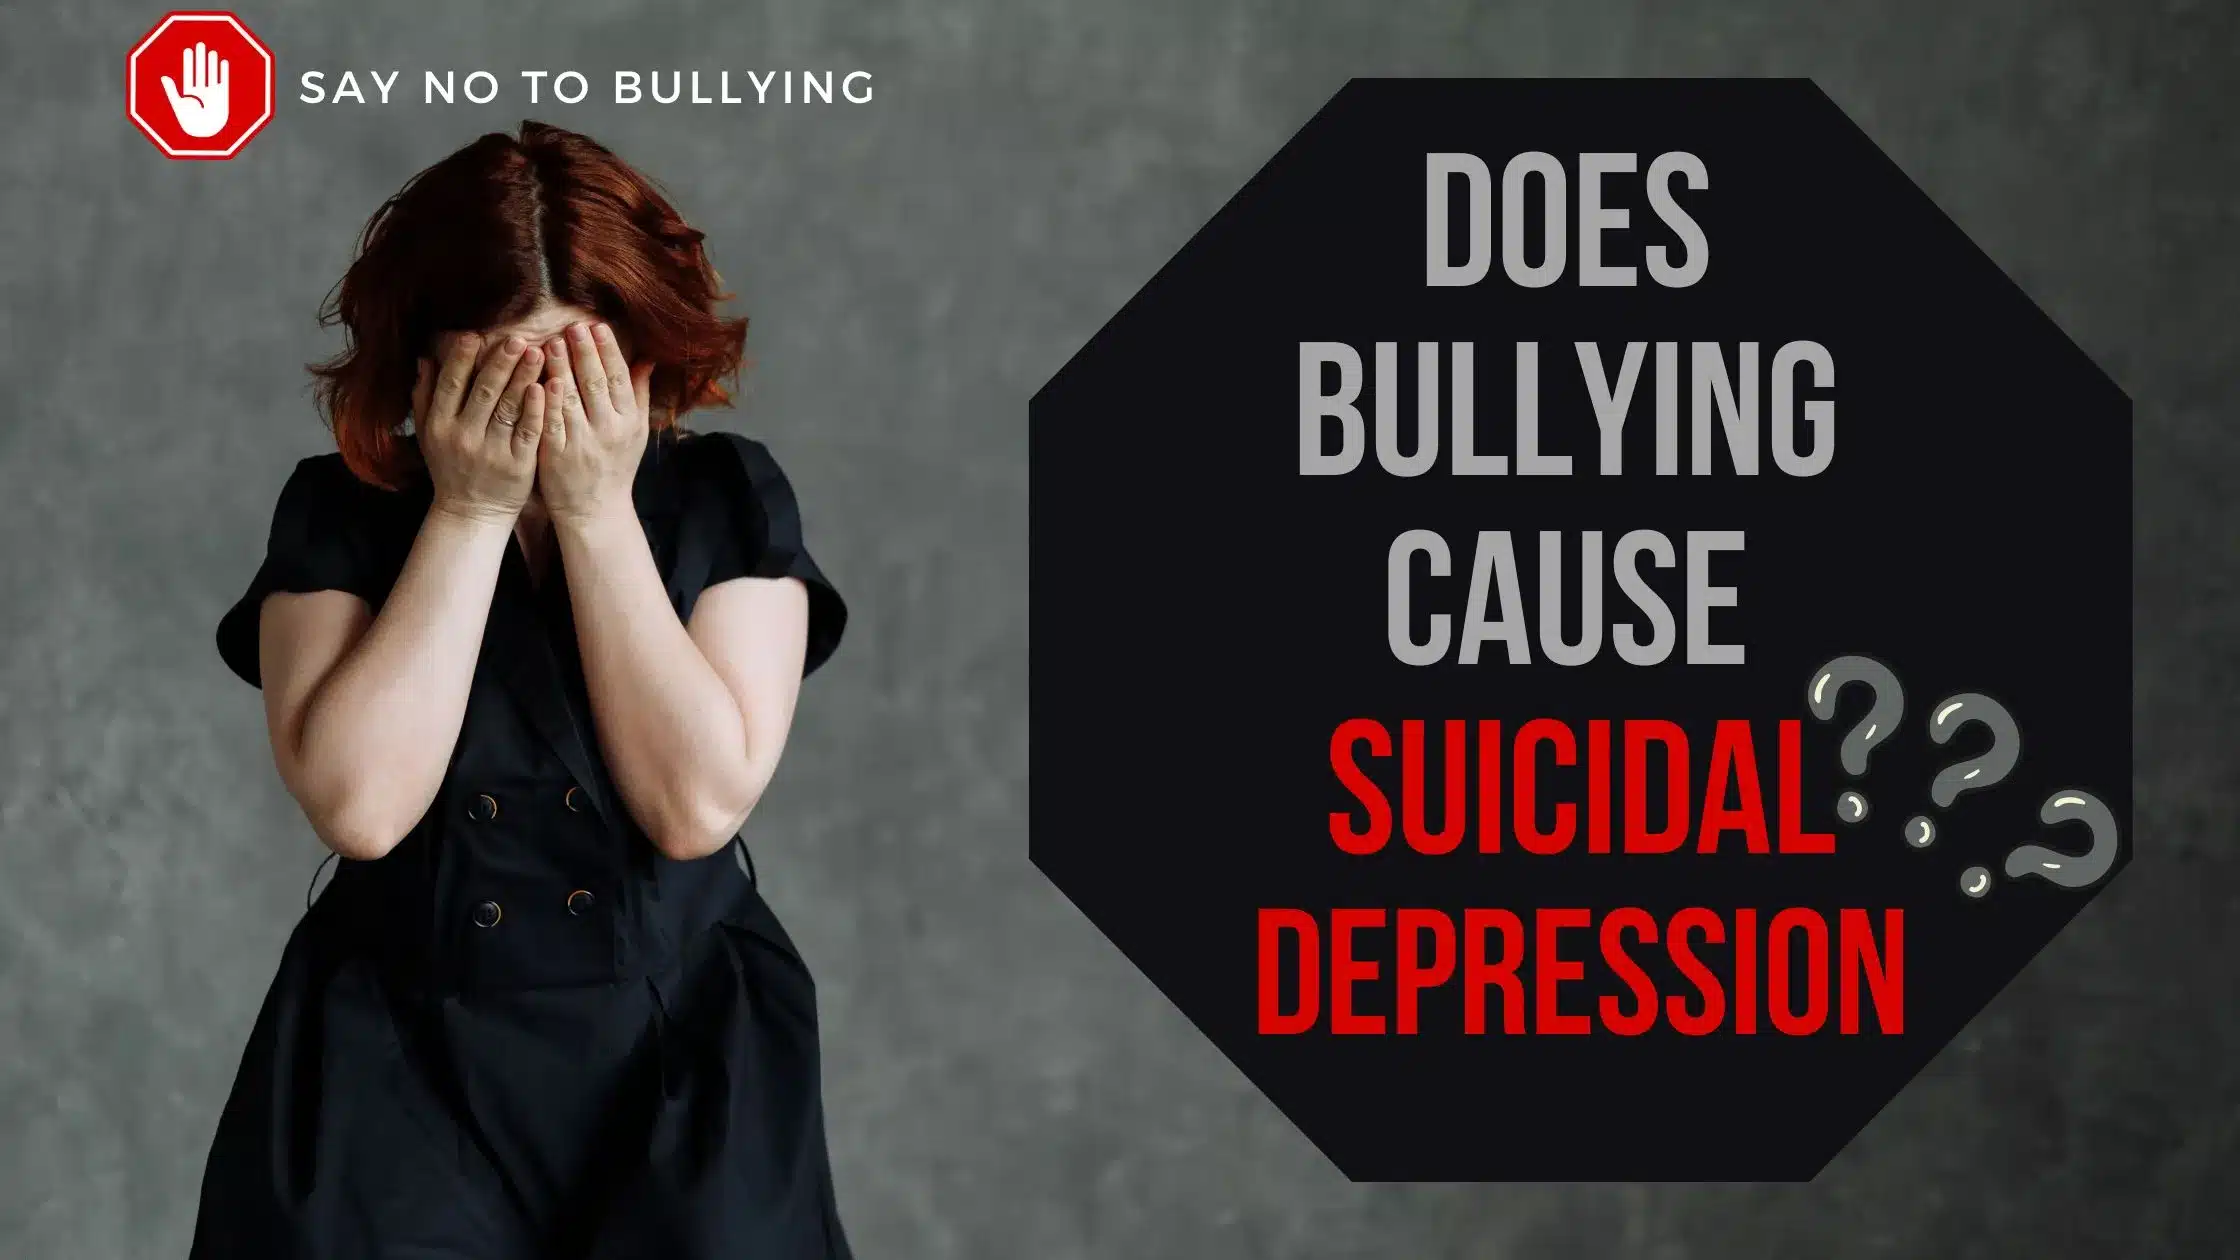 Does bullying cause suicidal depression